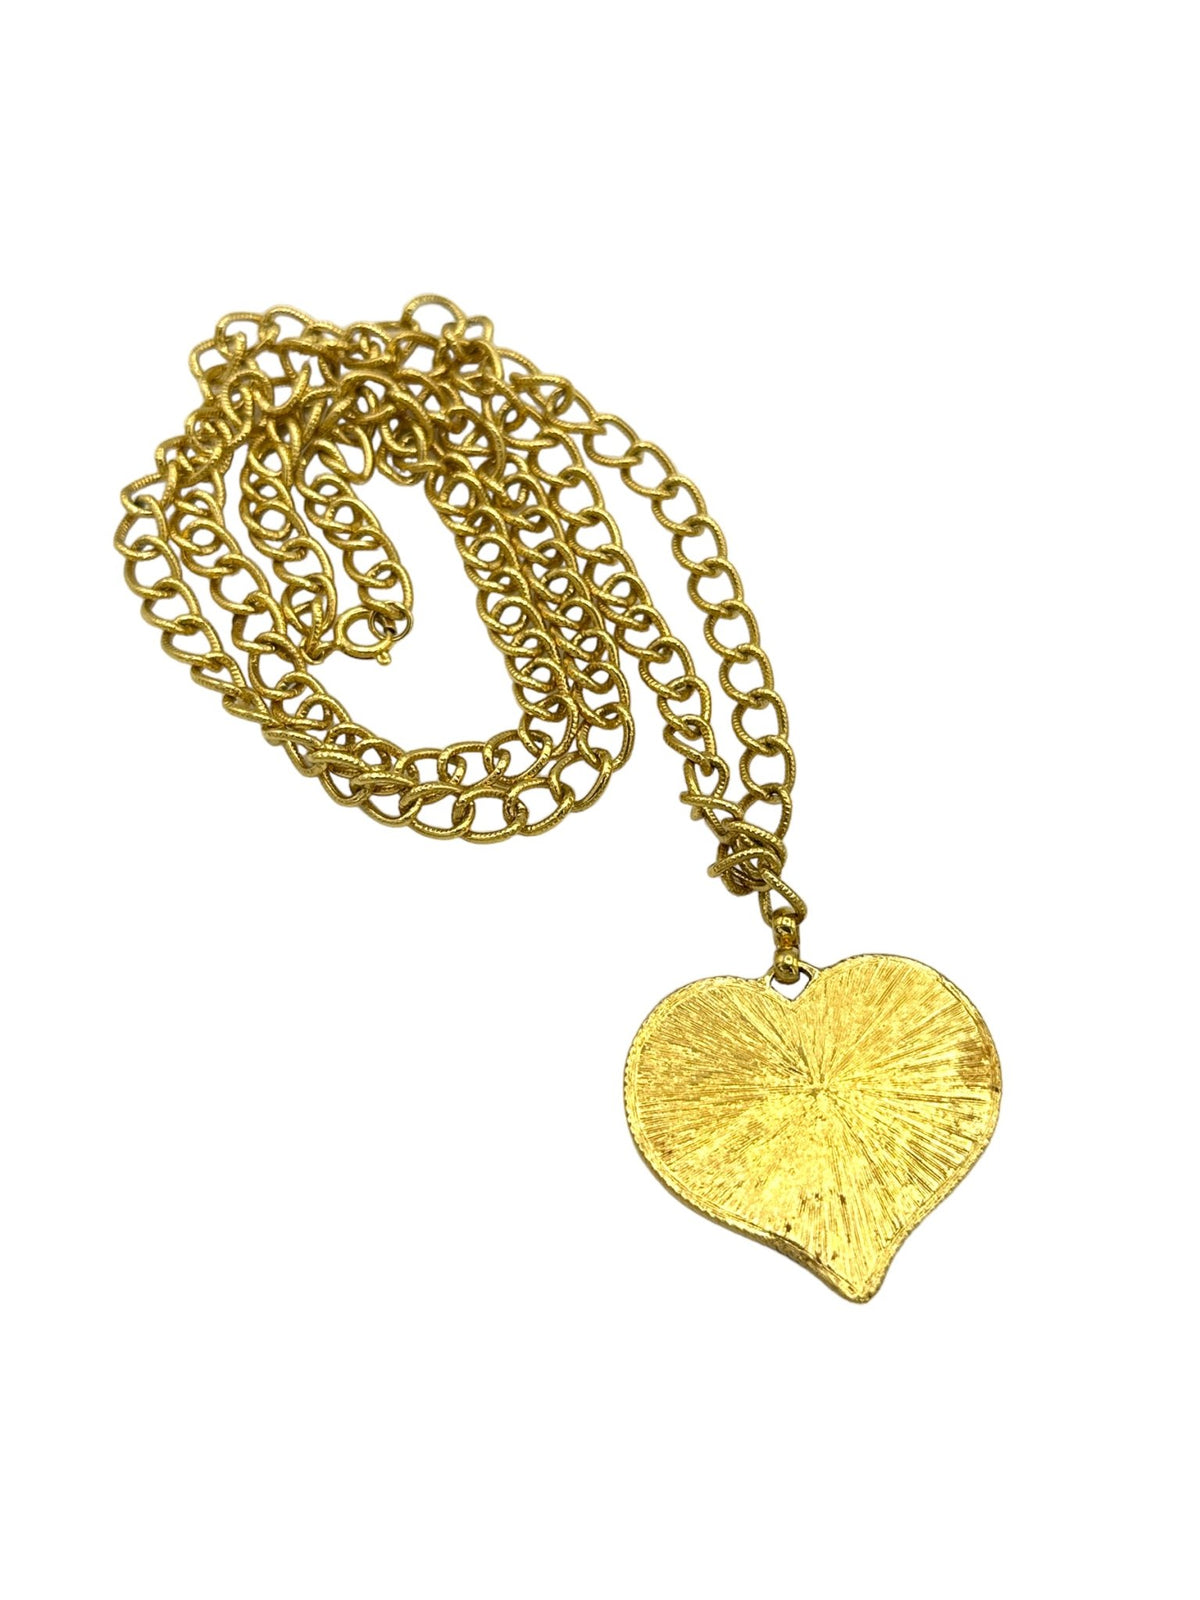 Gold Quilted Textured Rhinestone Heart Pendant - 24 Wishes Vintage Jewelry